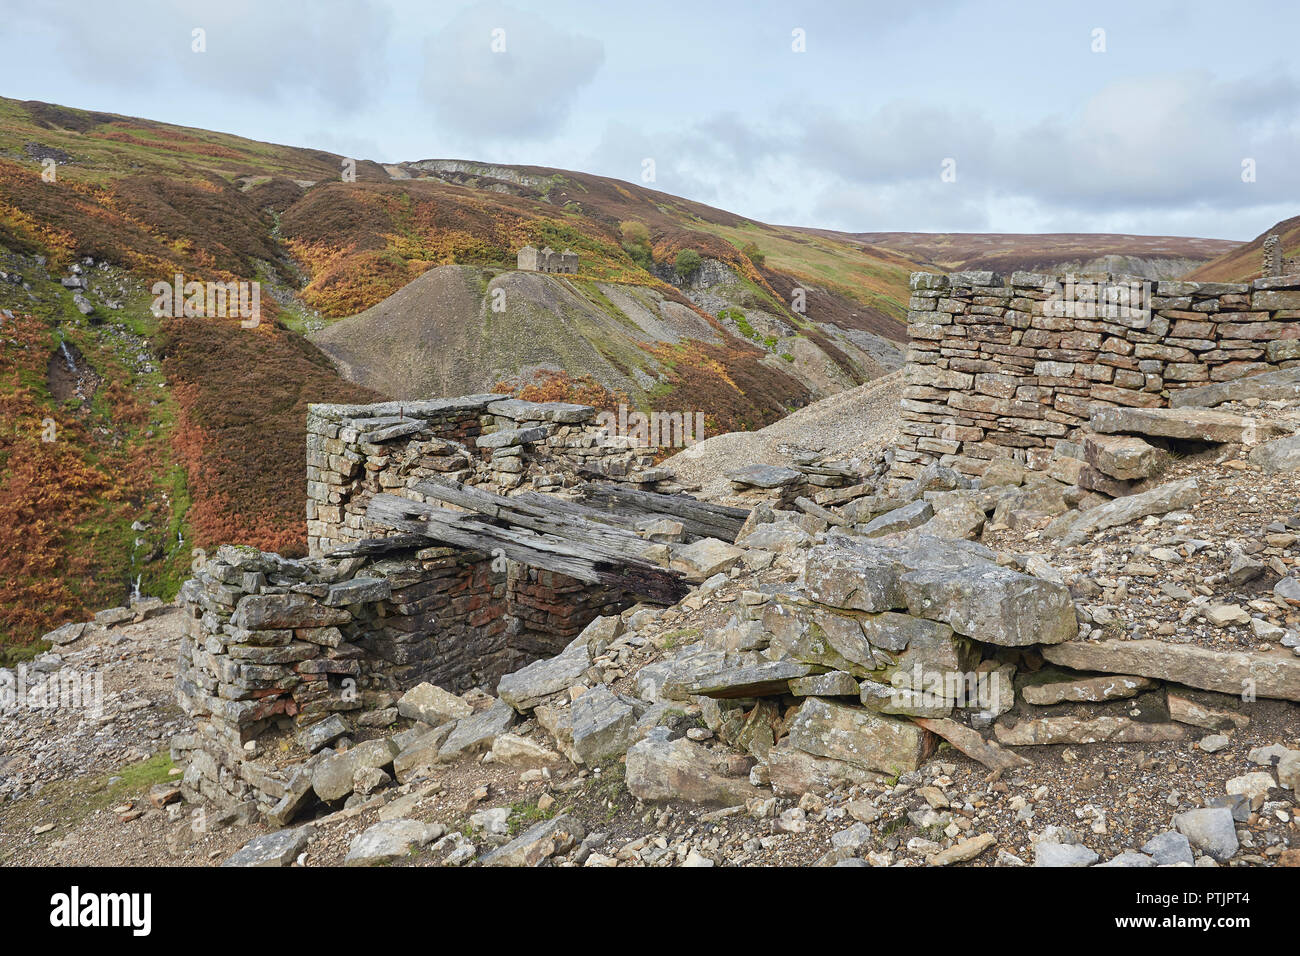 Remains of the once thriving lead mining industry, part of the Bunting mine, upper reaches of Gunnerside Ghyll Gill, Swaledale, Yorkshire Dales, UK Stock Photo